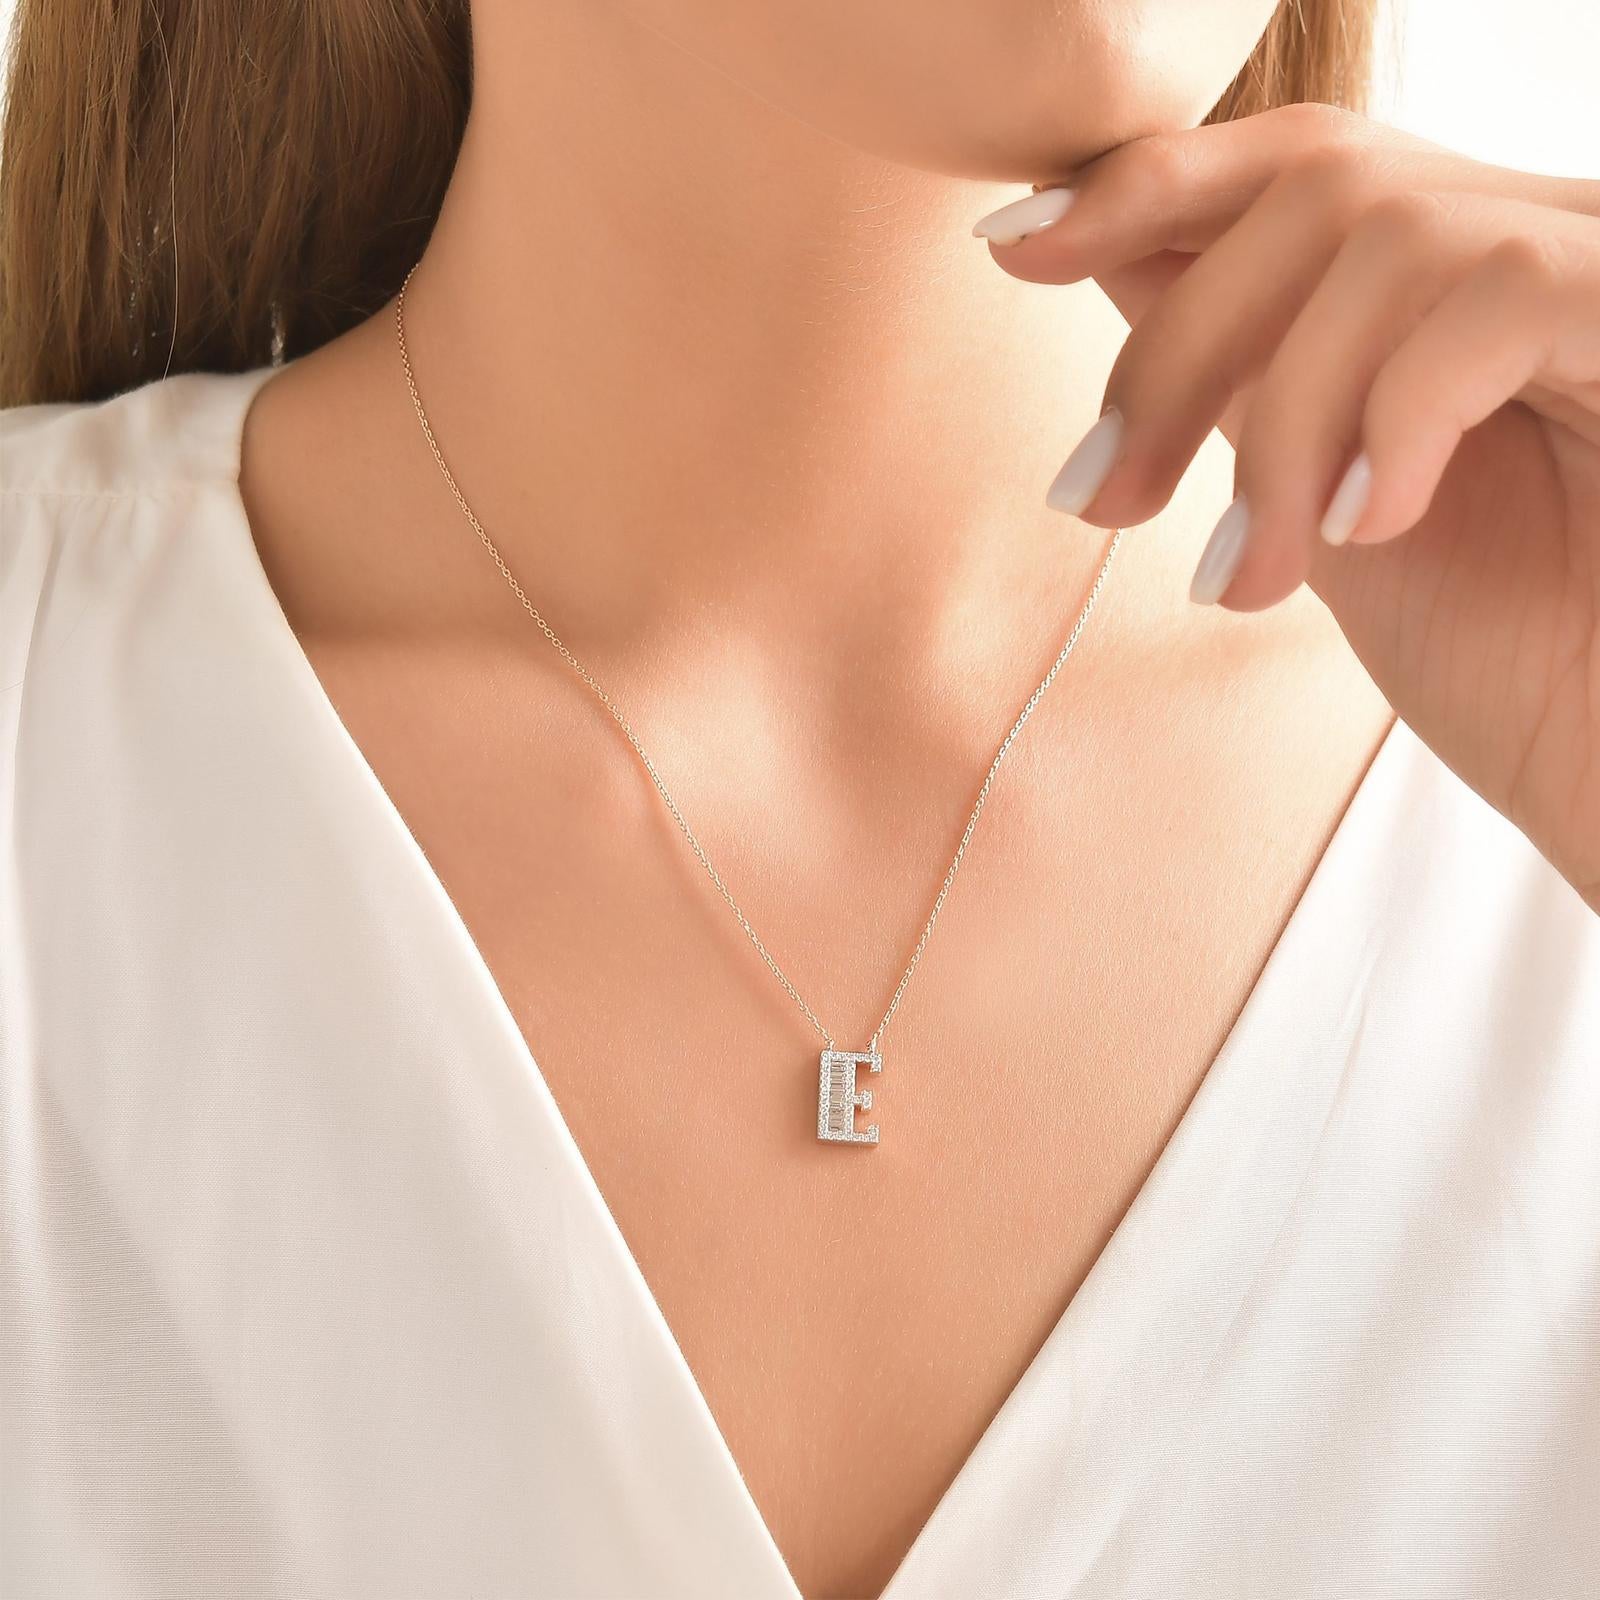 This Beautiful Baguette Diamond Letter Pendant Is Entirely Handcrafted In 14 Karat White Gold. 
The Letter E Pendant Is Garlanded With Channel-Set Baguette-Cut Diamonds And Prong Set Brilliant Round Diamonds Weighing 0.43 Carats. All Of The Stones